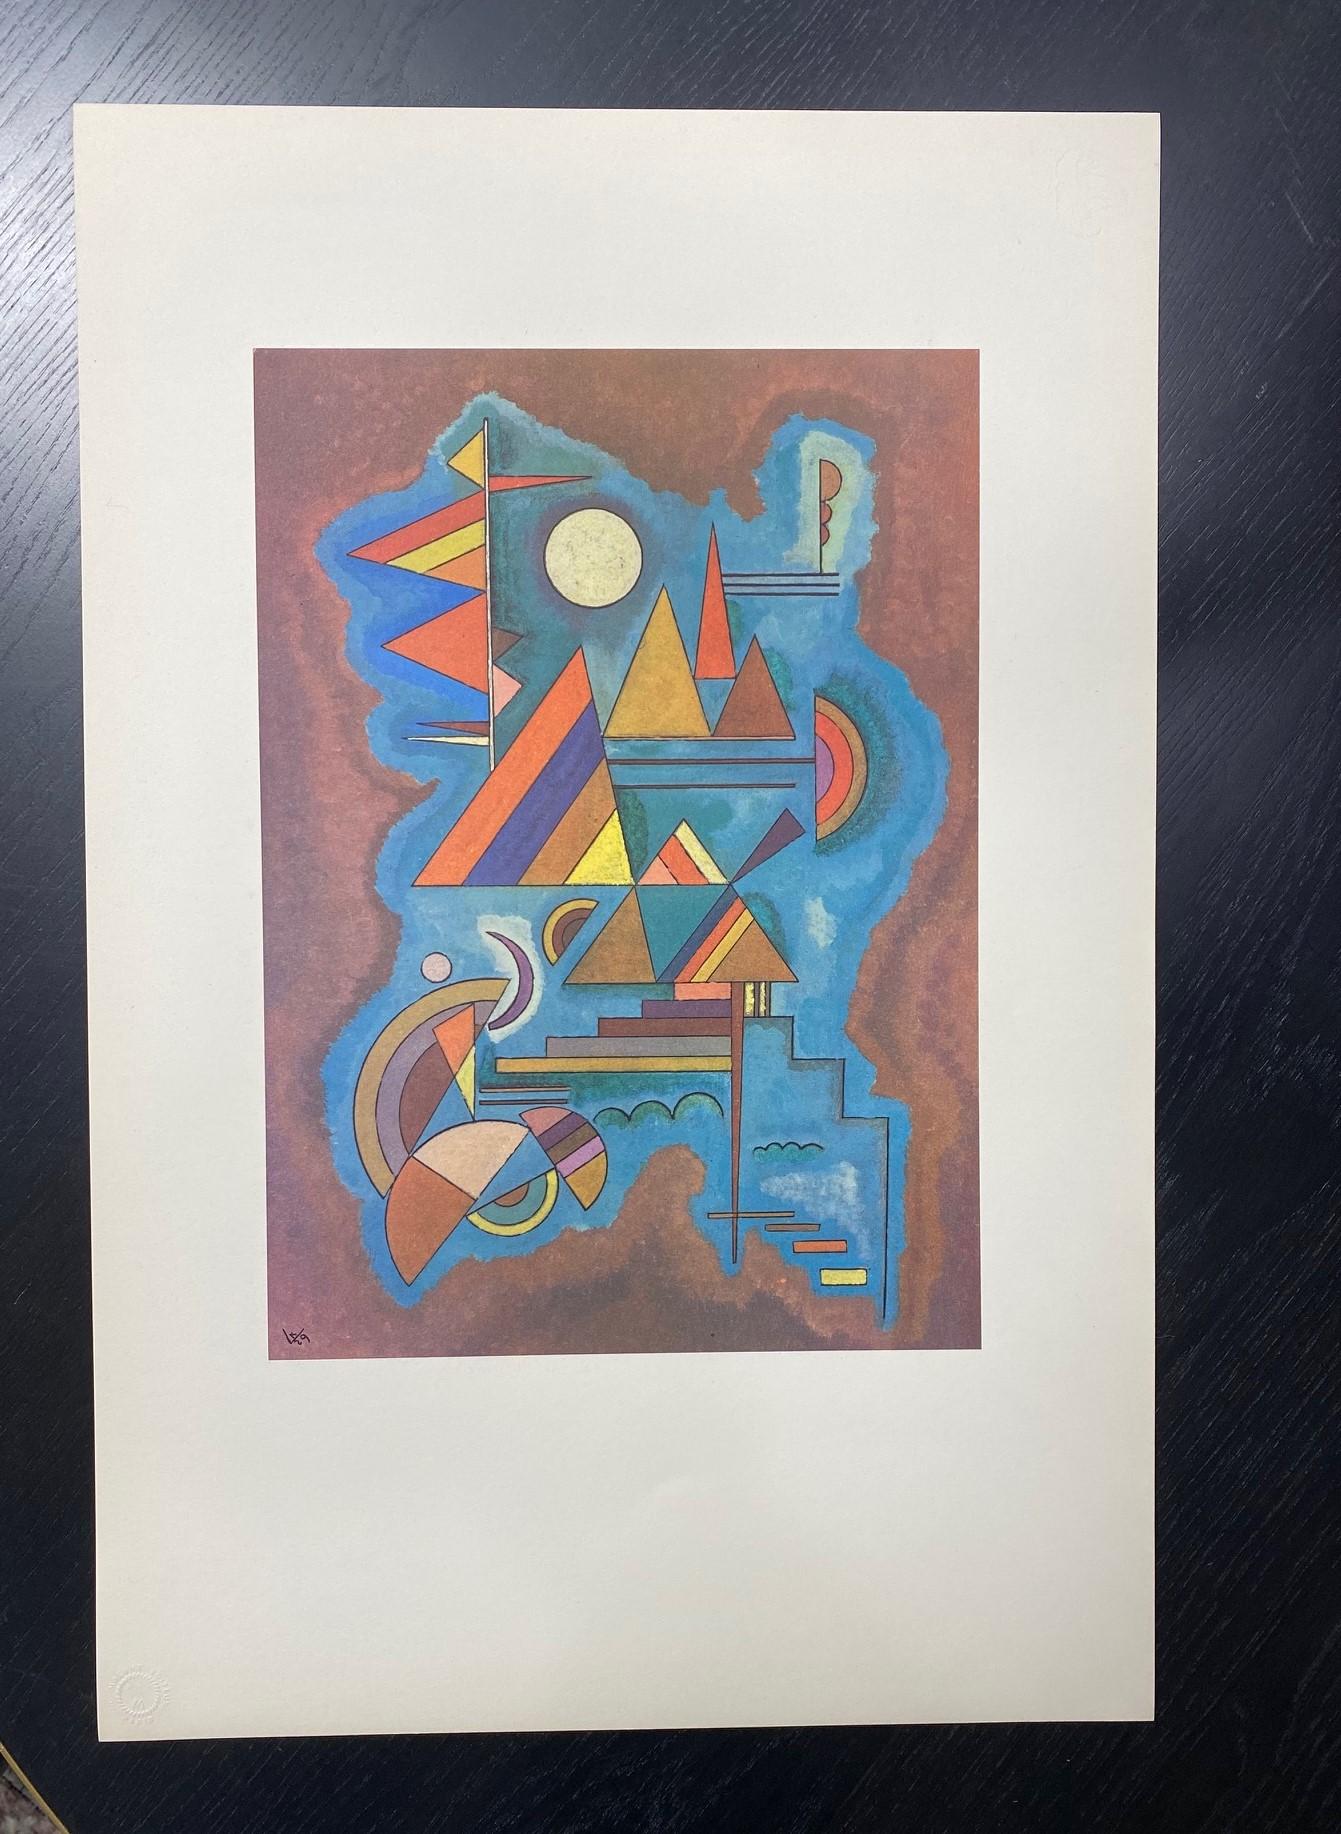 A beautiful limited edition abstract expressionism offset lithograph of the Russian painter and art theorist Wassily Kandinsky's 